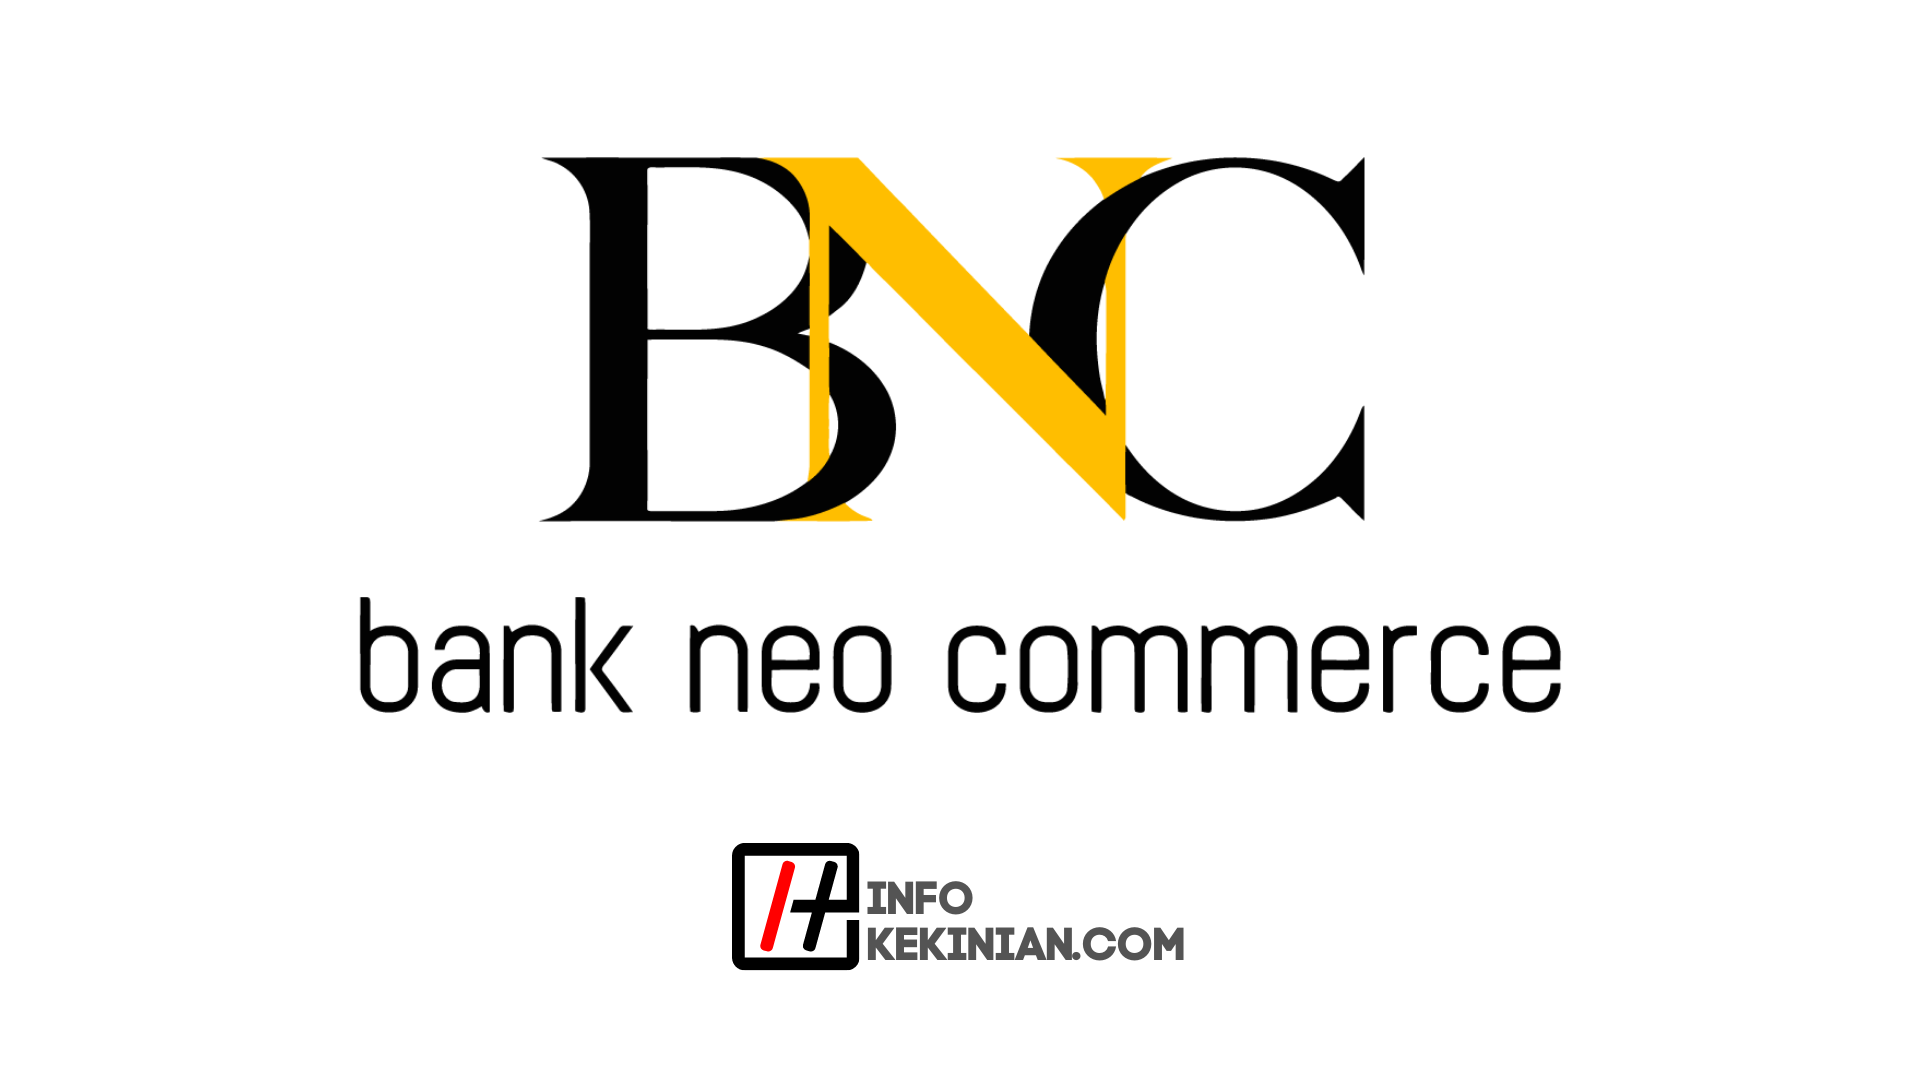 How to Register for a Digital Neo Commerce Bank